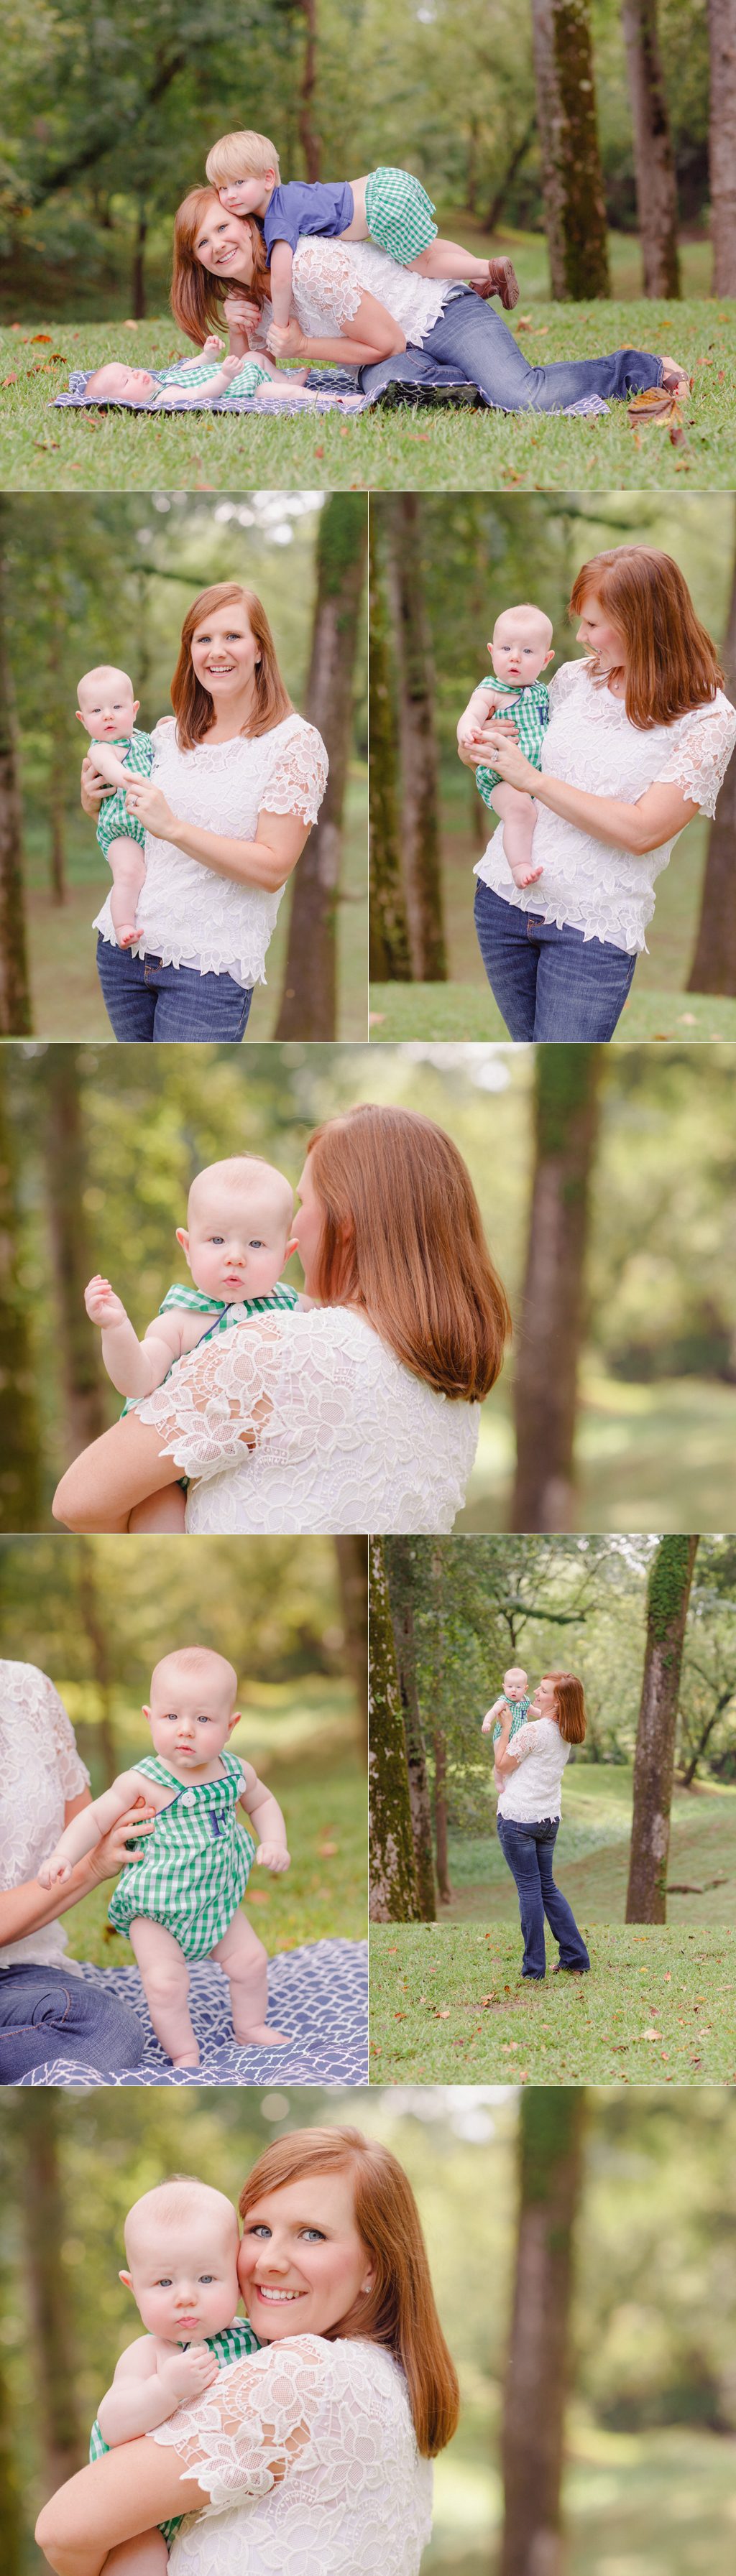 Atlanta mother and son portraits taken in a park.